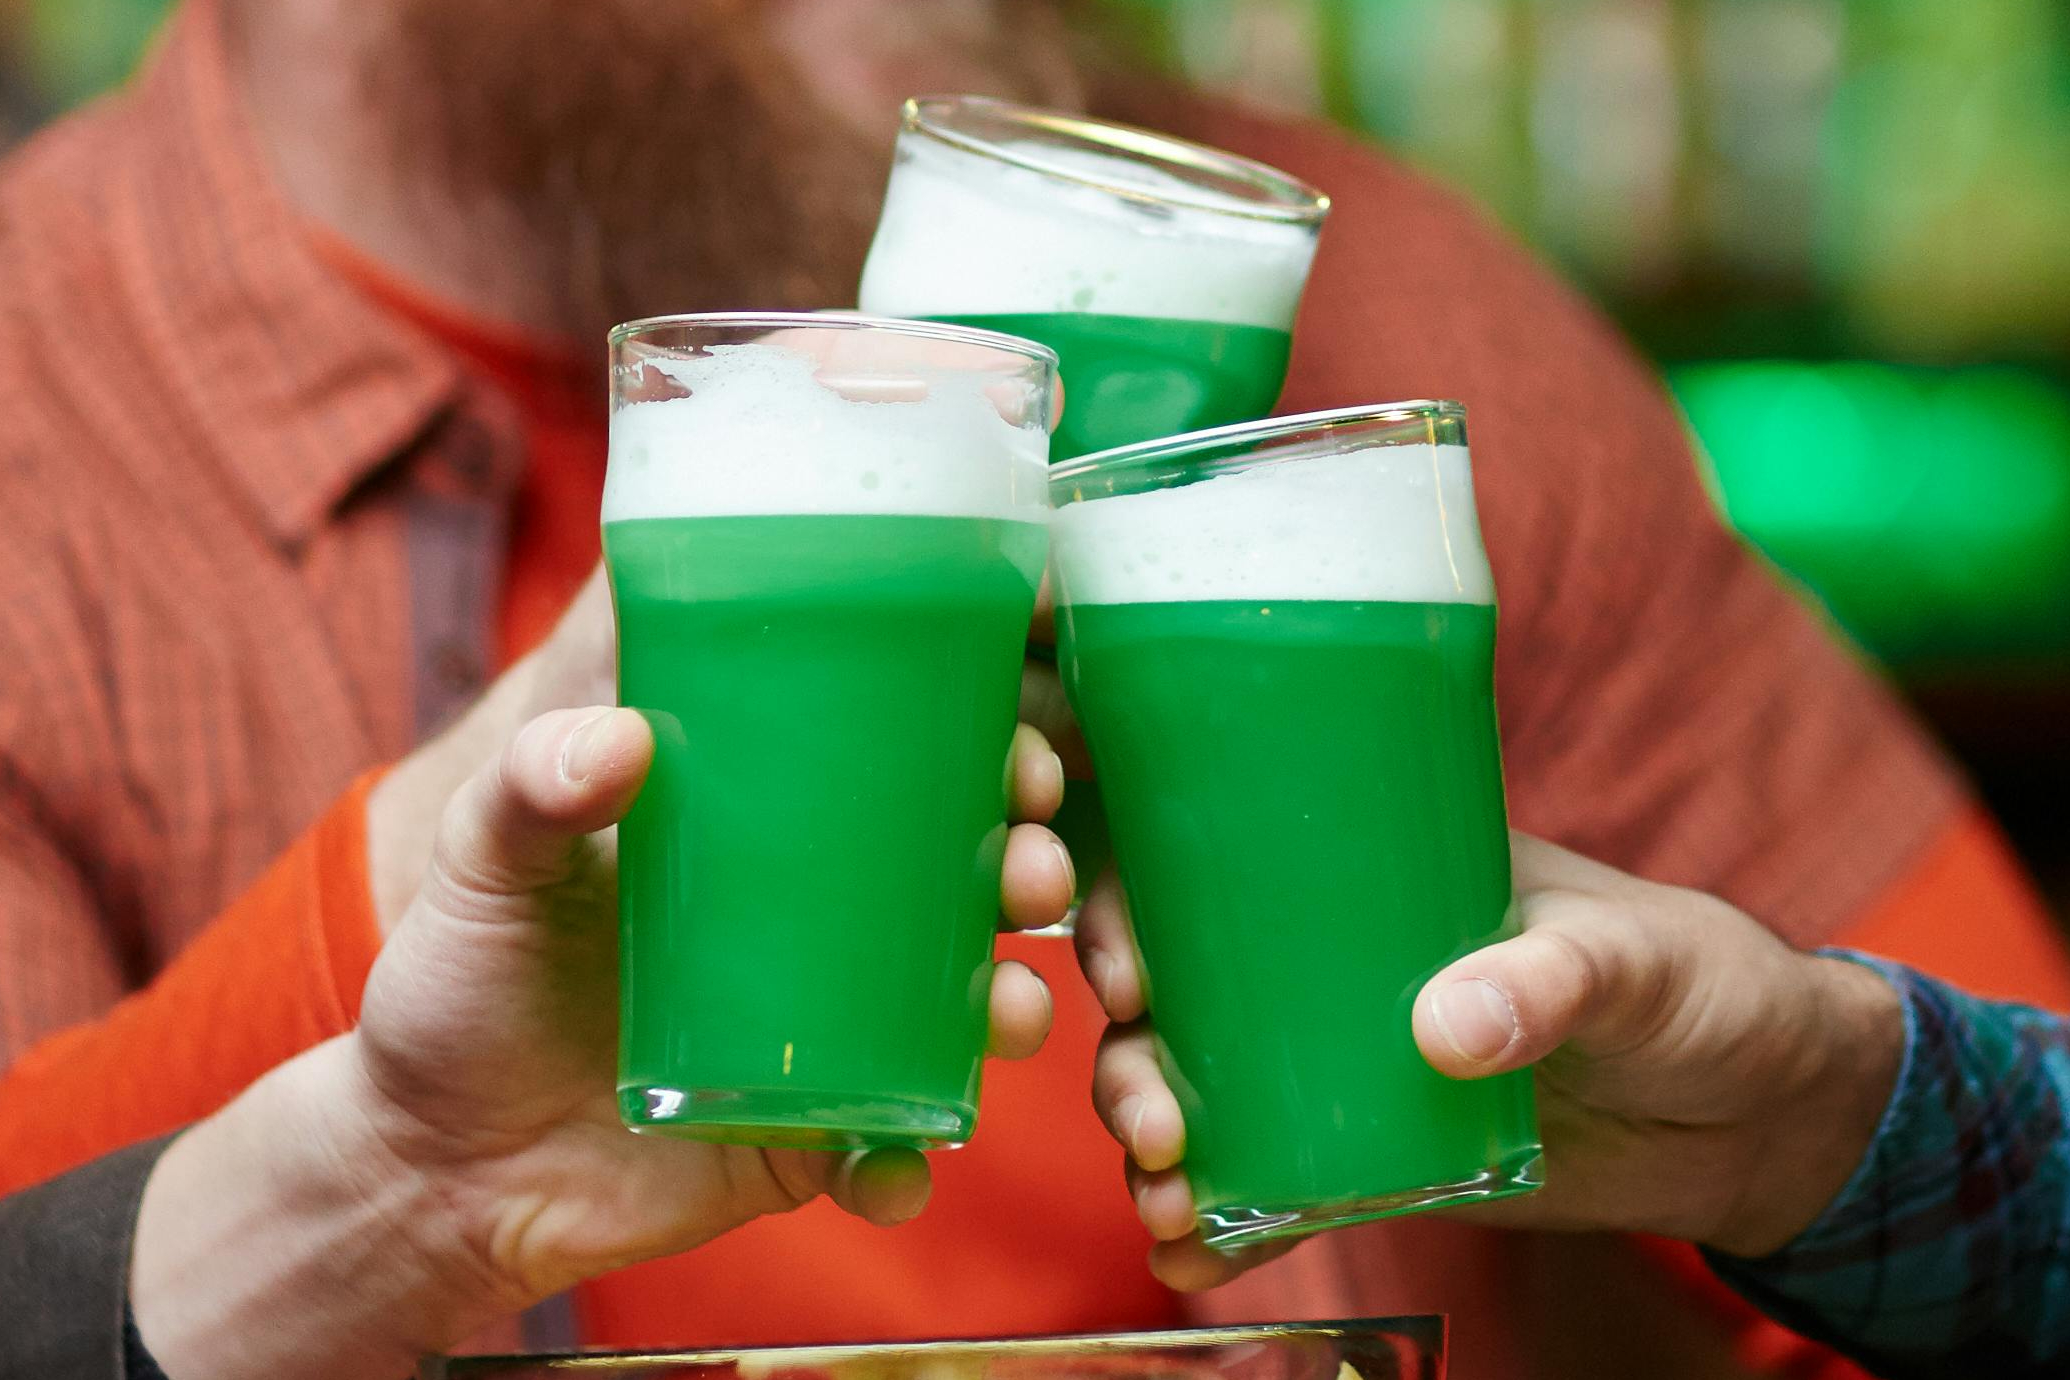 Trussville to hold first ever St. Patrick’s Day Pub Crawl